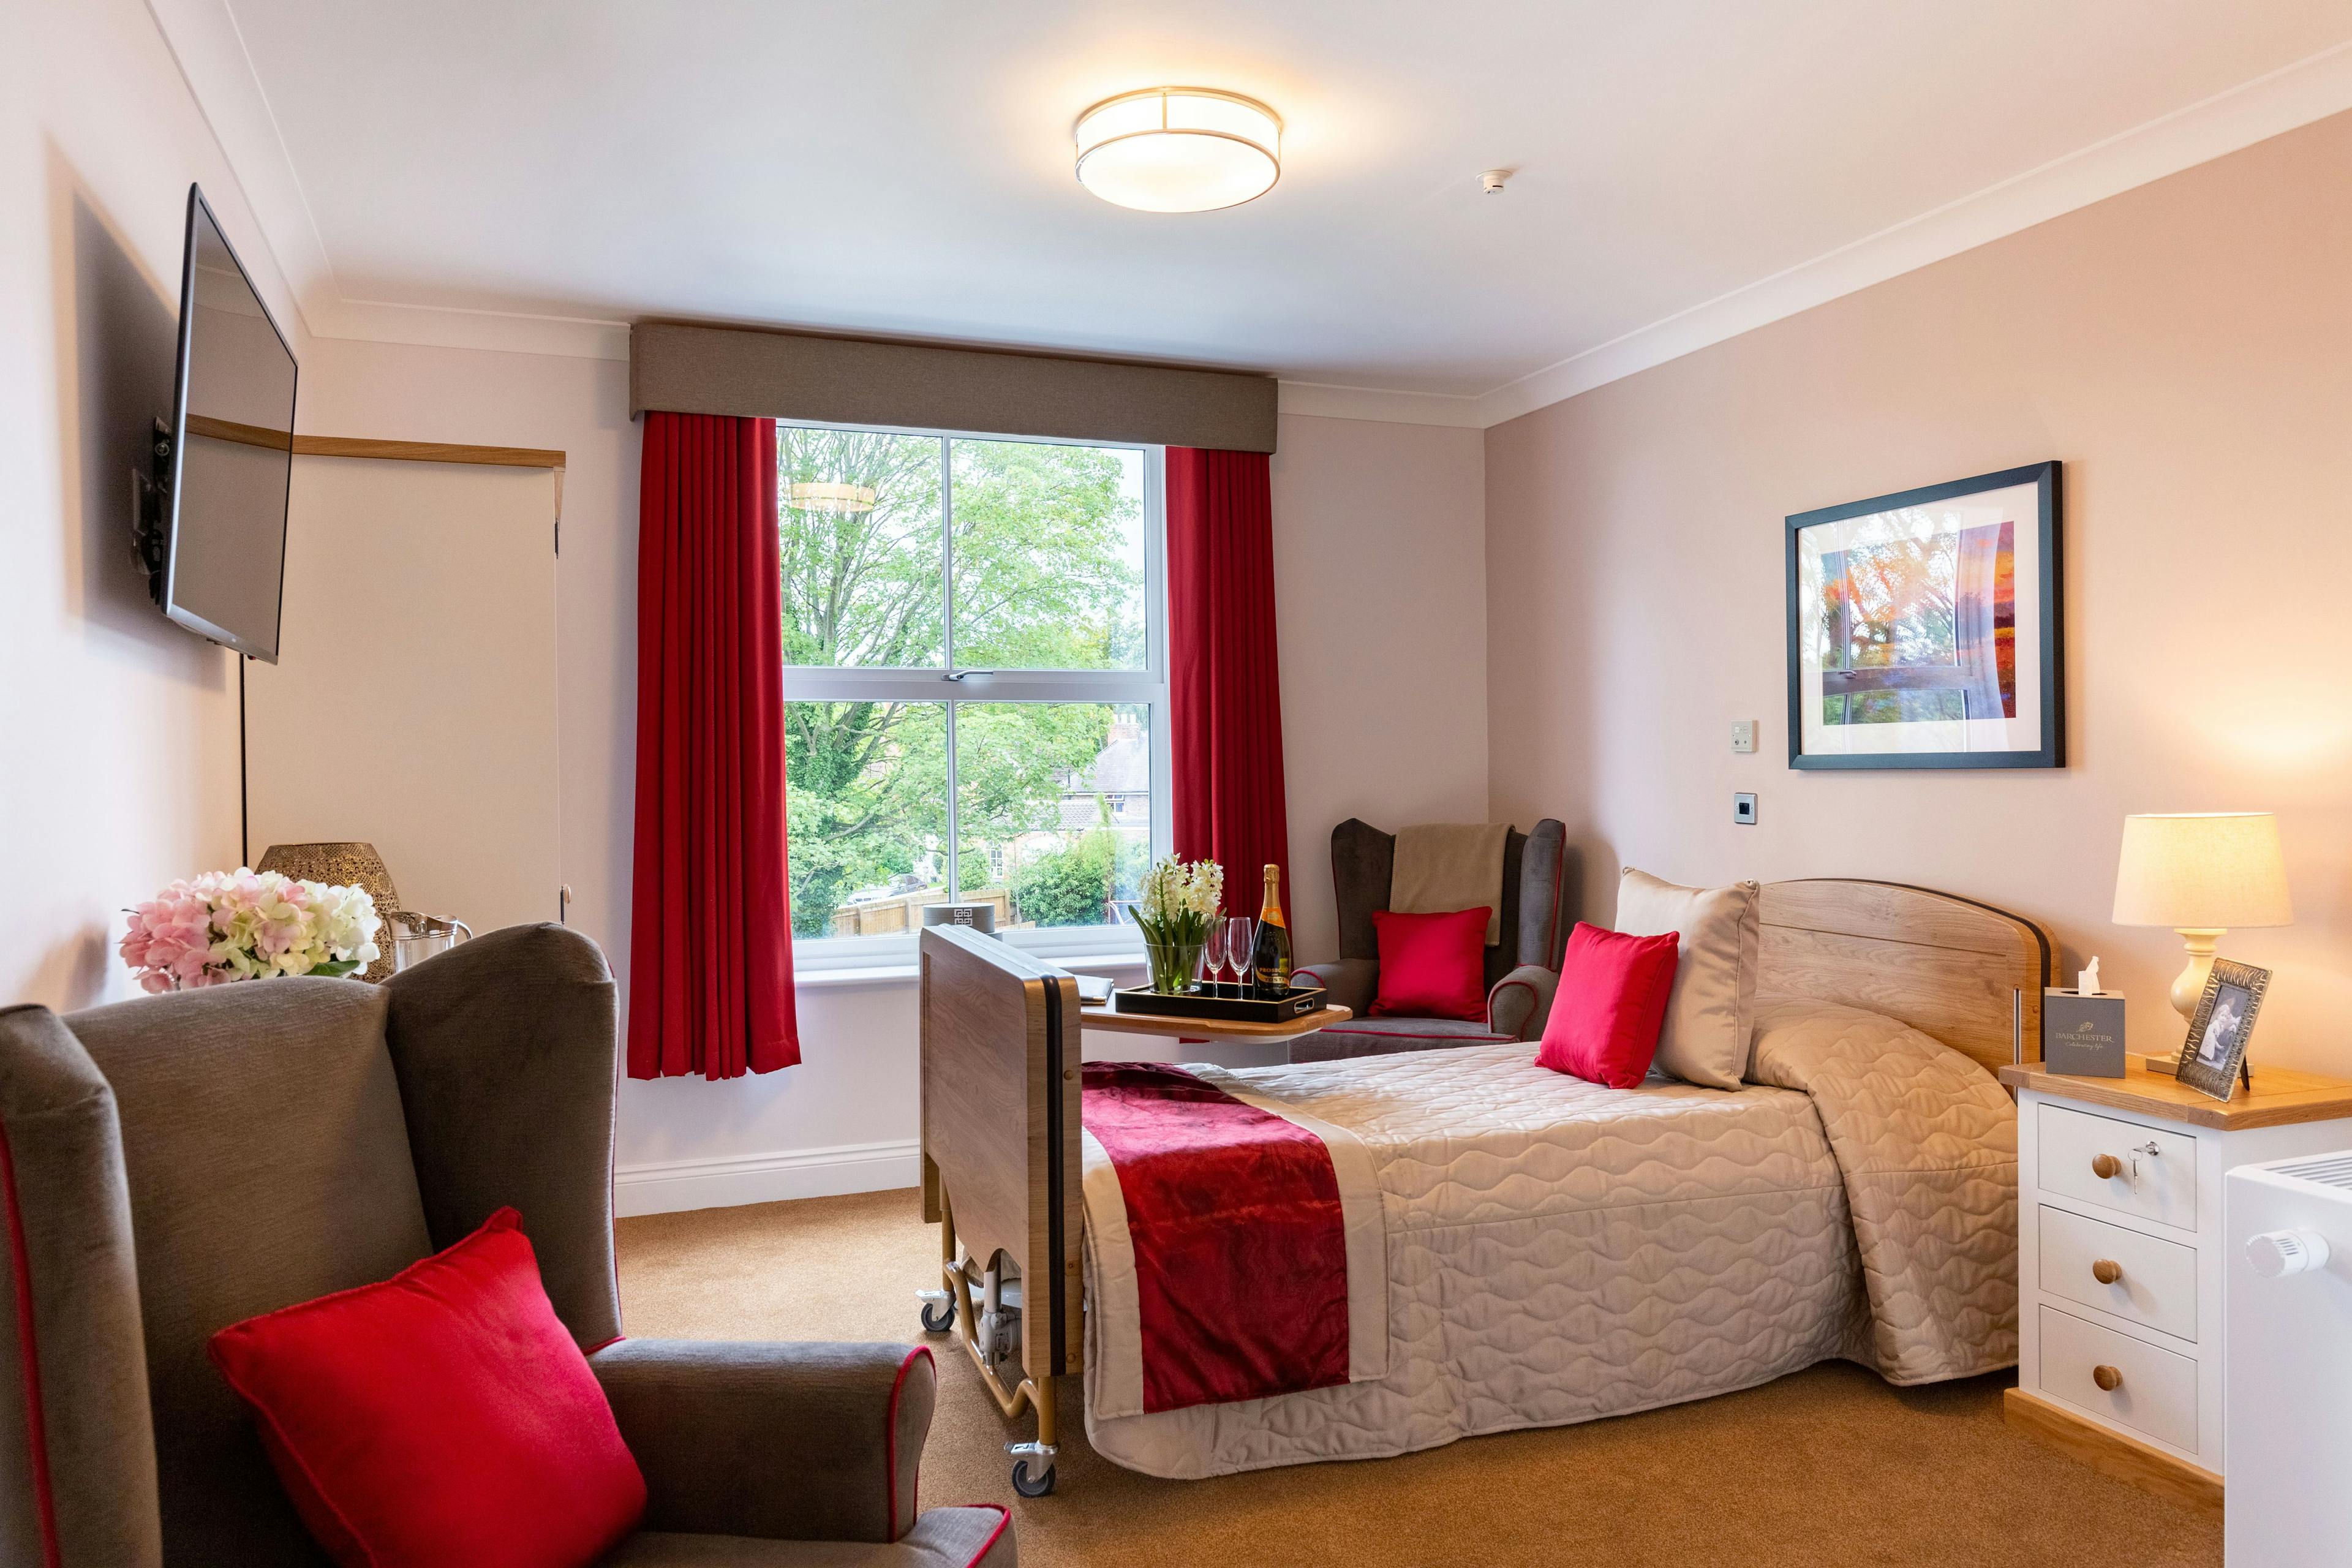 Bedroom at Ouse View Care Home in York, North Yorkshire